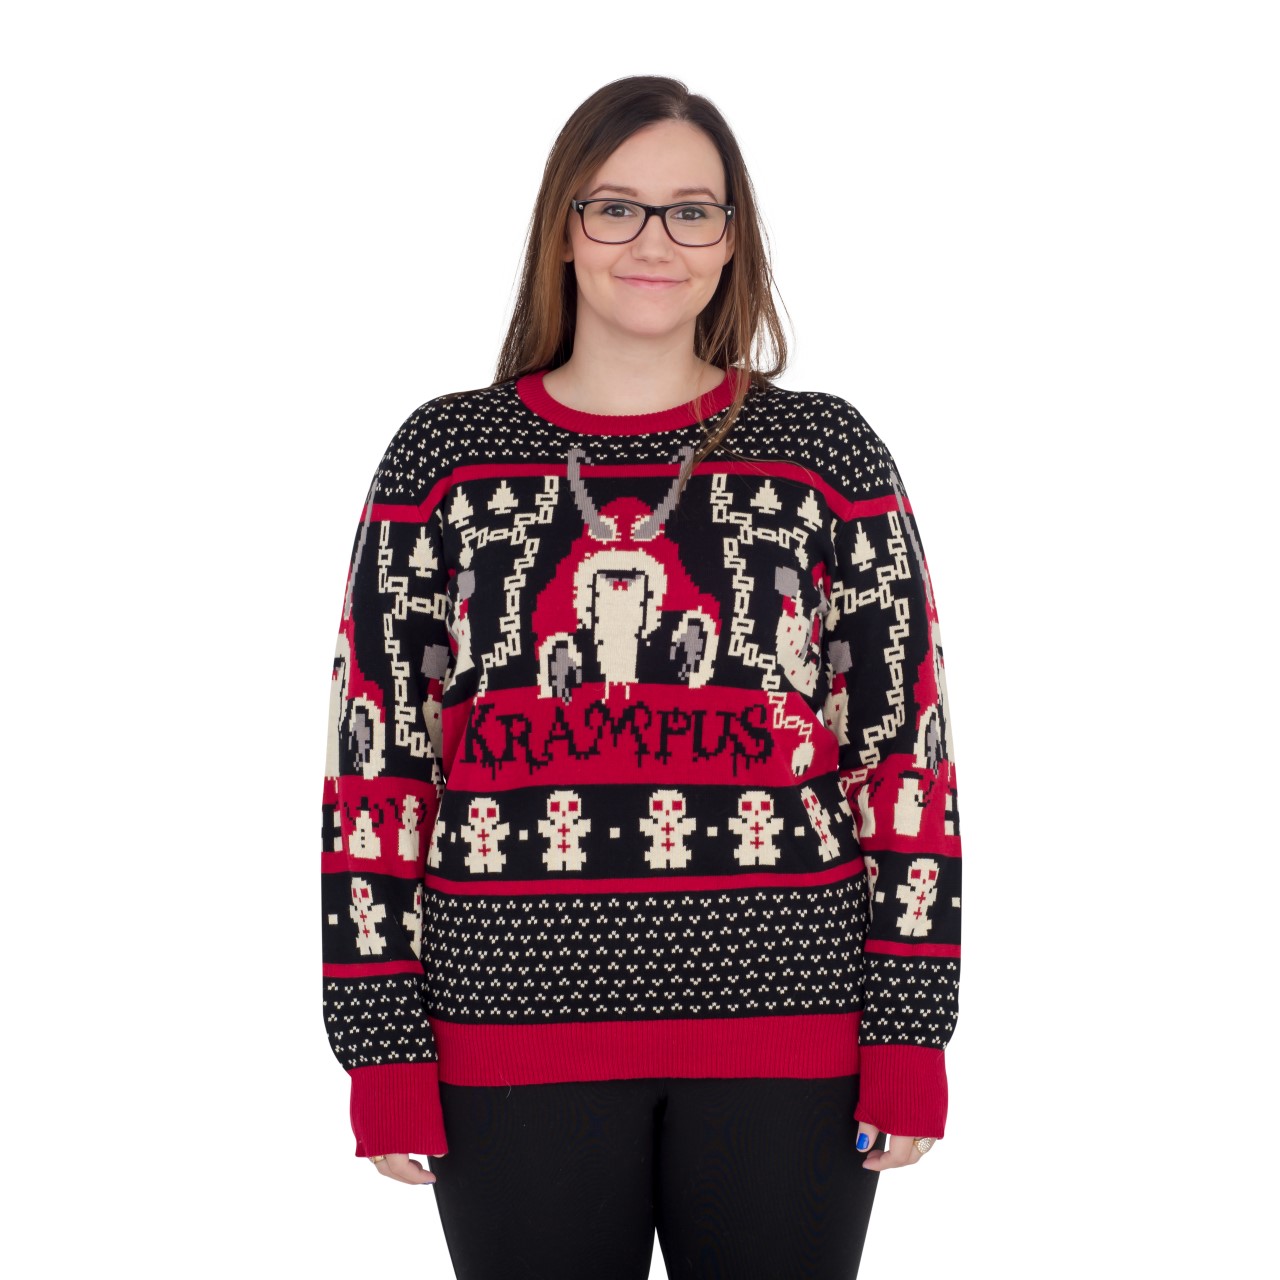 Women’s Krampus Knit Ugly Christmas Sweater,Ugly Christmas Sweaters | Funny Xmas Sweaters for Men and Women